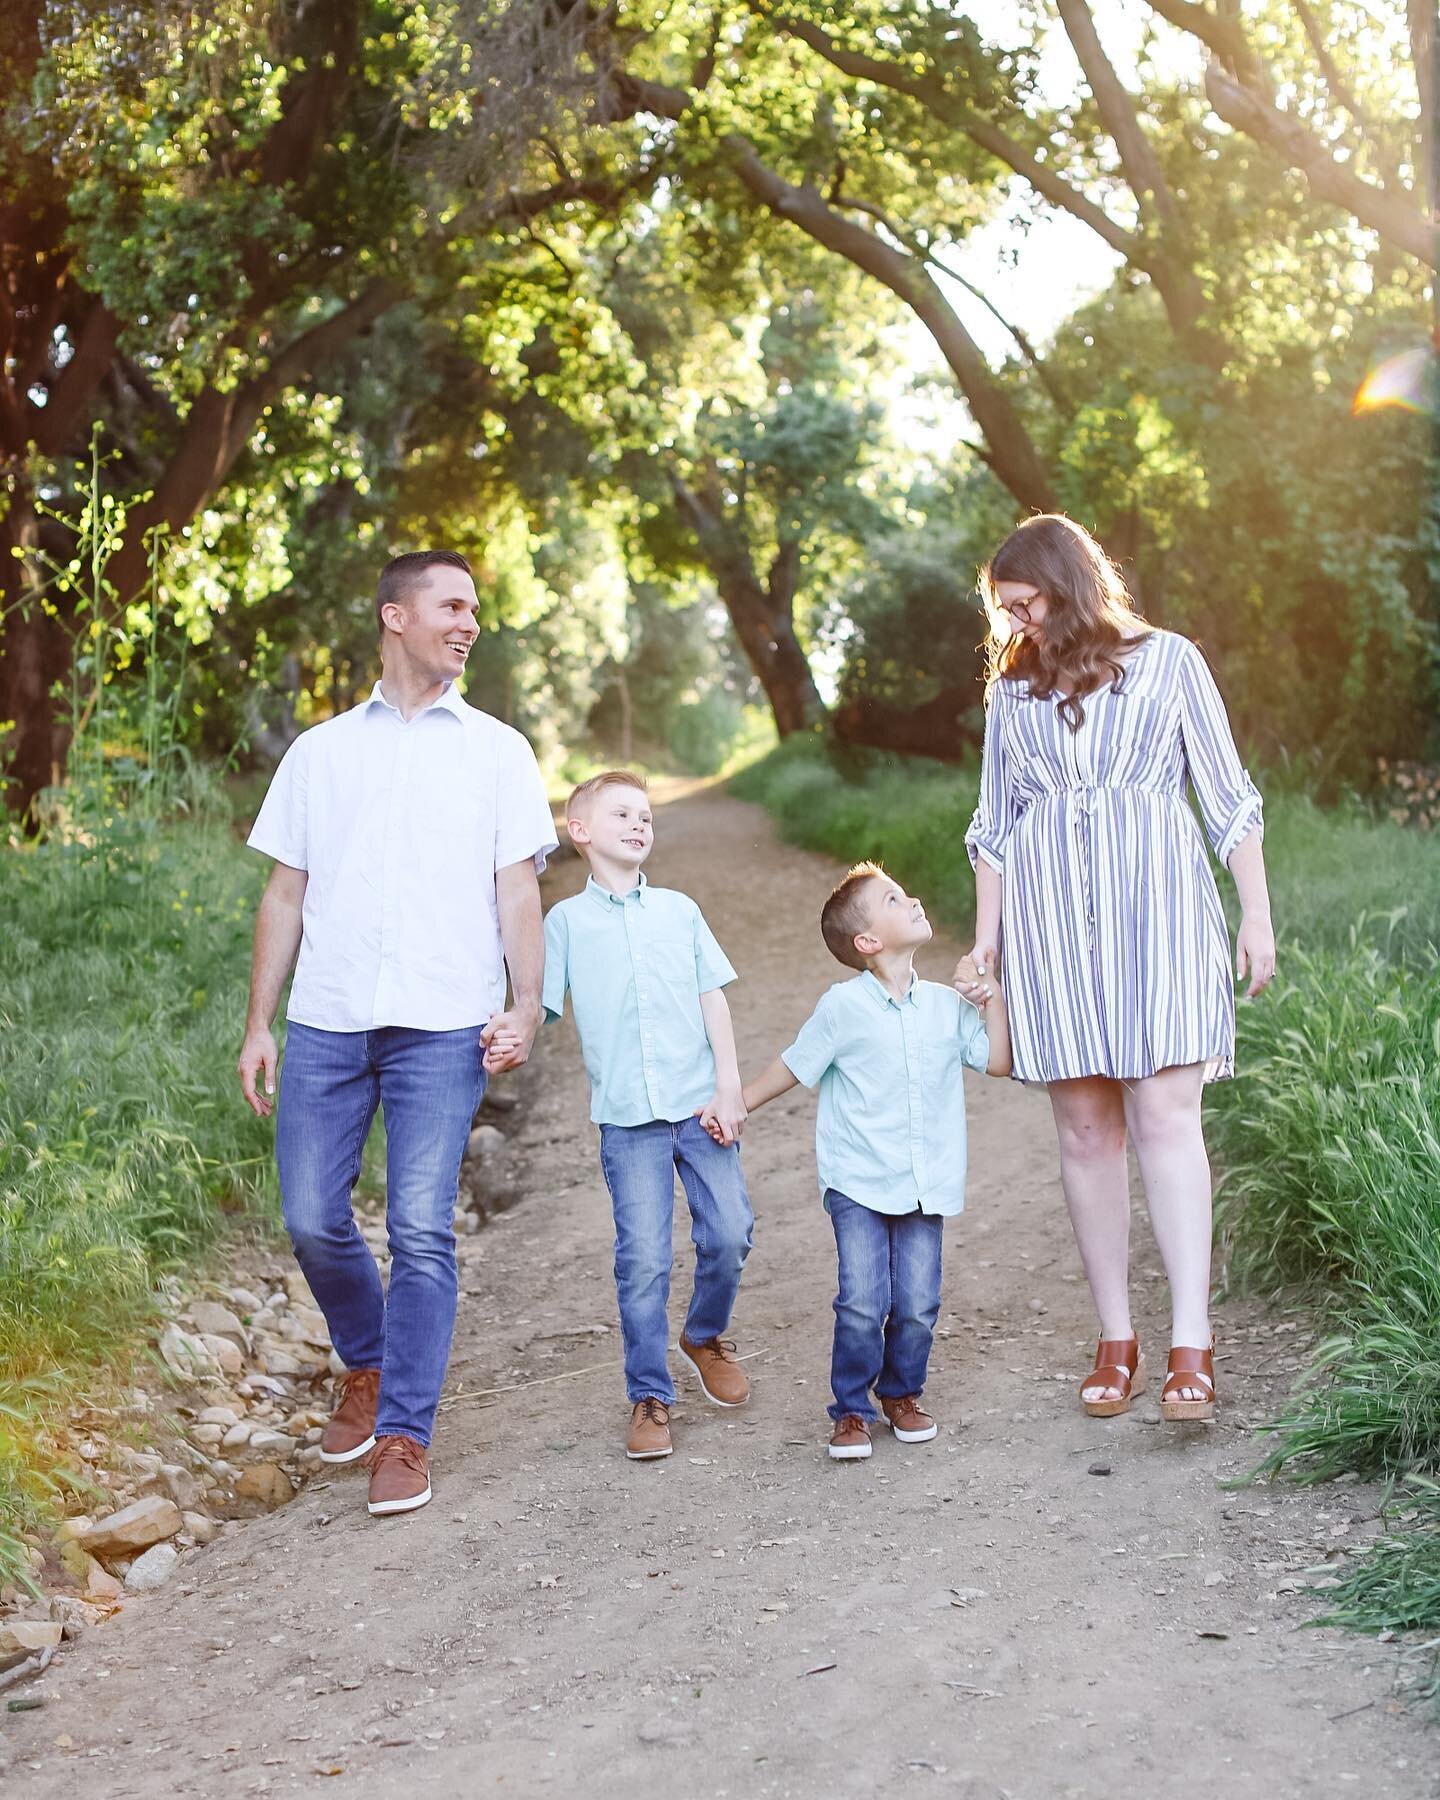 Mother Nature has been showing off lately with the wildflowers and golden sunsets ✨  #familyphotographer #orangecountyphotographer #laphotographer #fullertonphotographer #breaphotographer #lahabraphotographer #whittierphotographer #familyphotos #supe